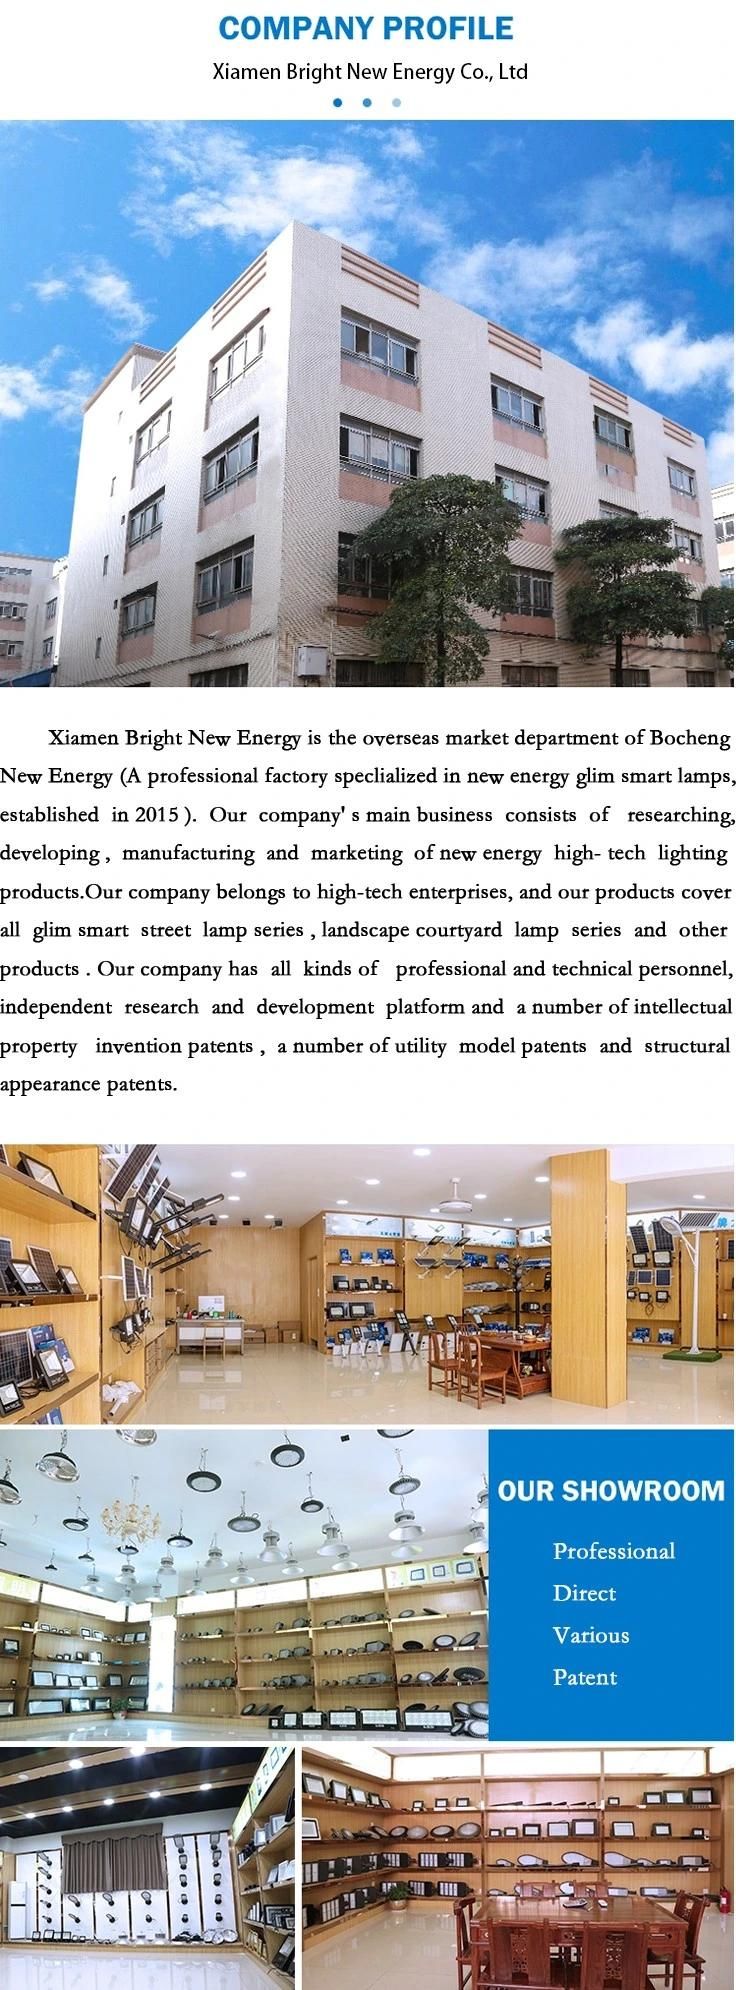 LED Lamp 30W Lights Stall Trolley Decoration Energy Saving Power System Home Lamps Bulb Products Indoor Outdoor Light